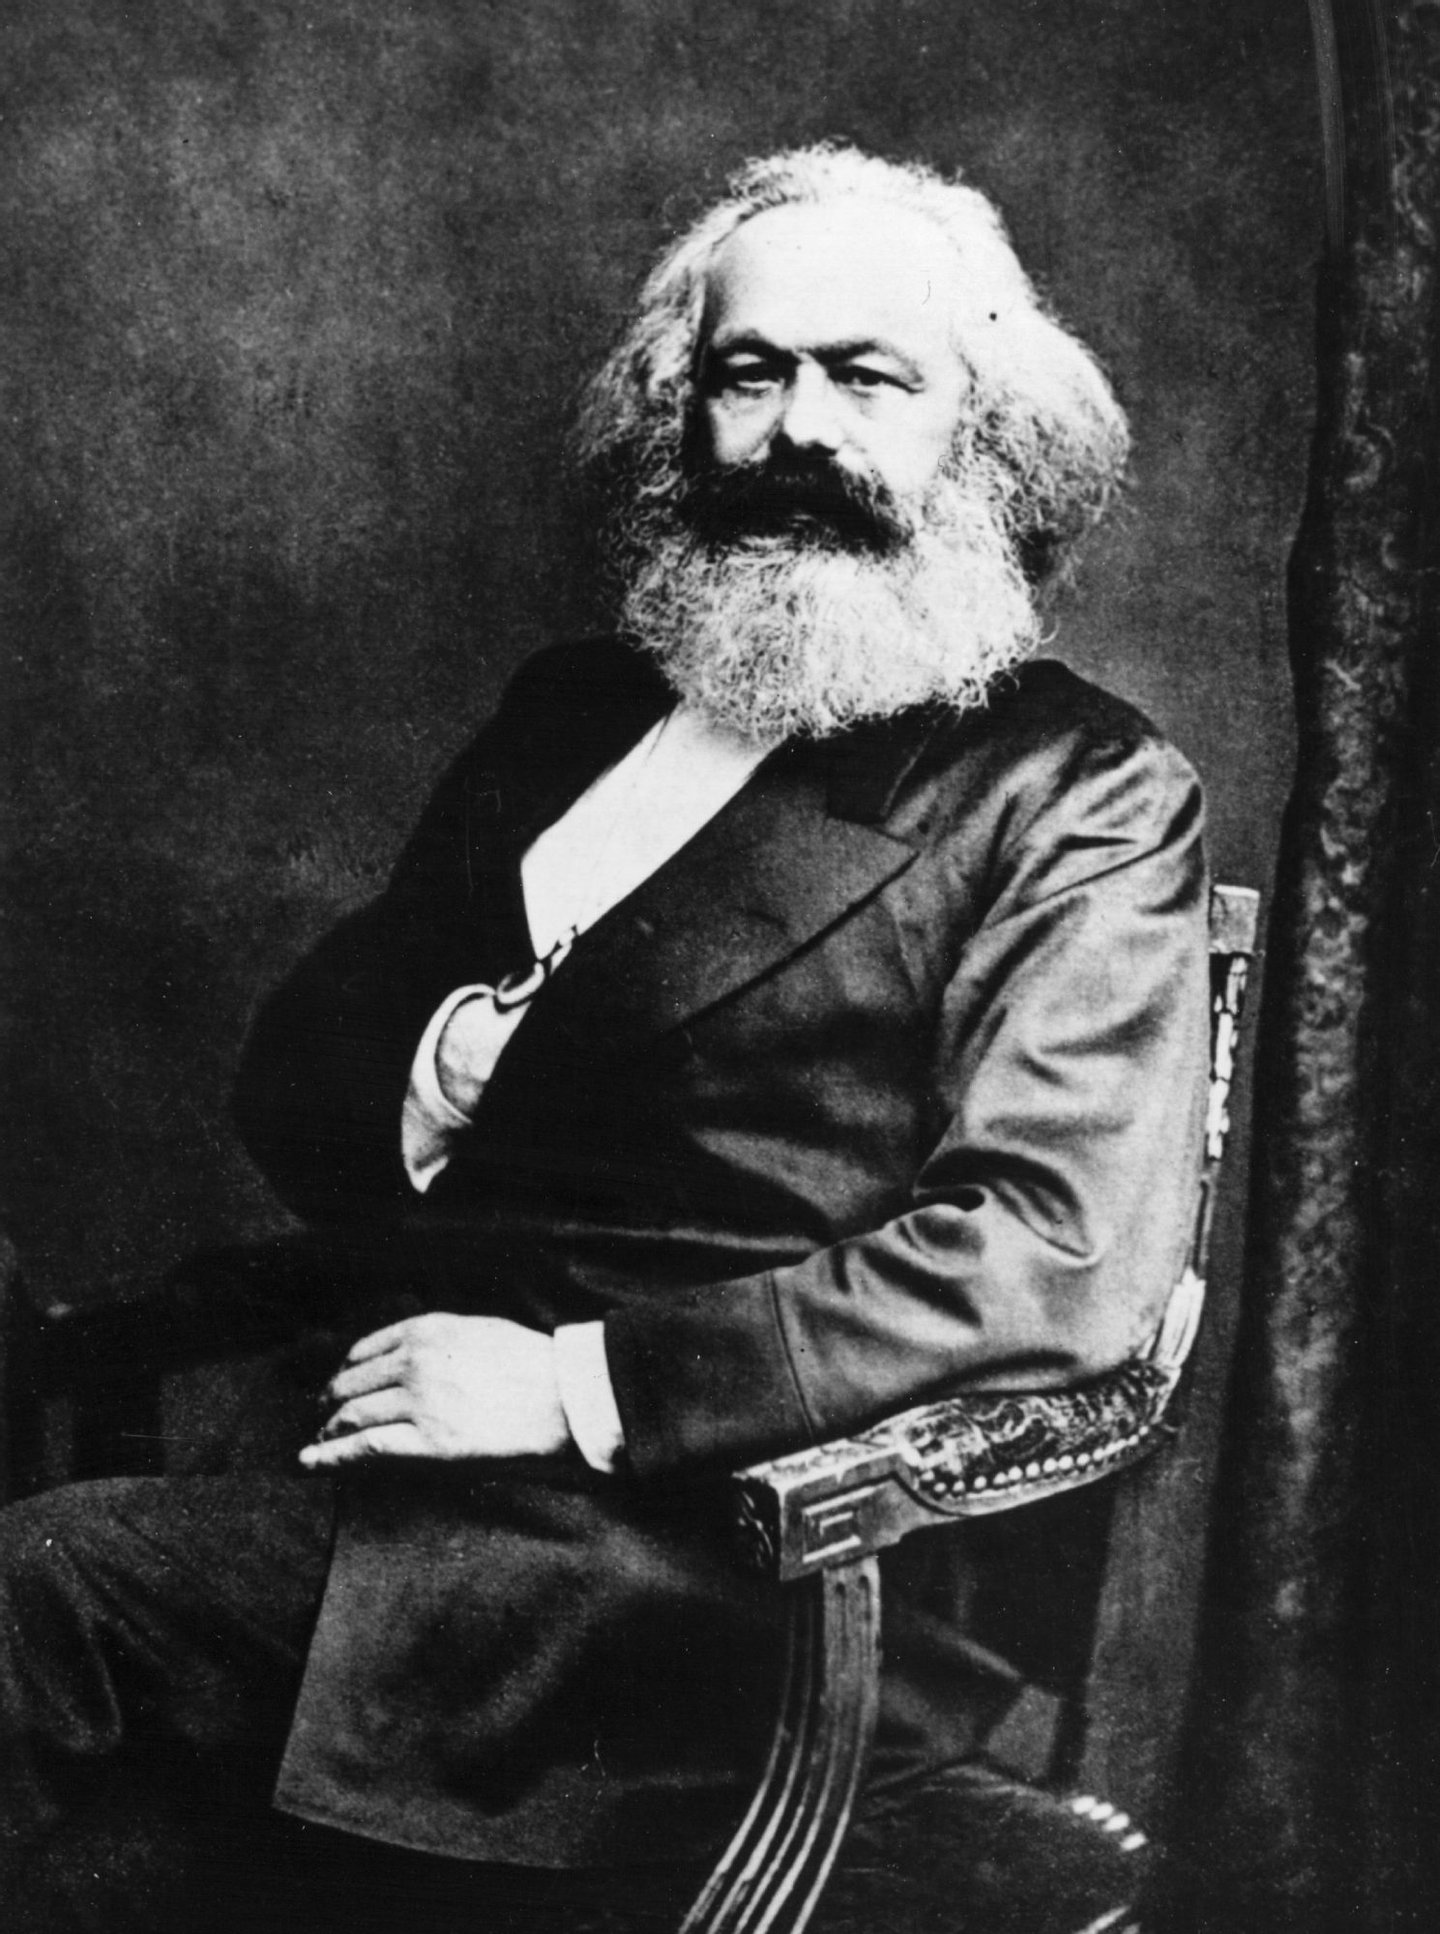 German social, political and economic theorist Karl Marx (1818 - 1883) the inspiration of modern international communism. (Photo by Henry Guttmann/Getty Images)